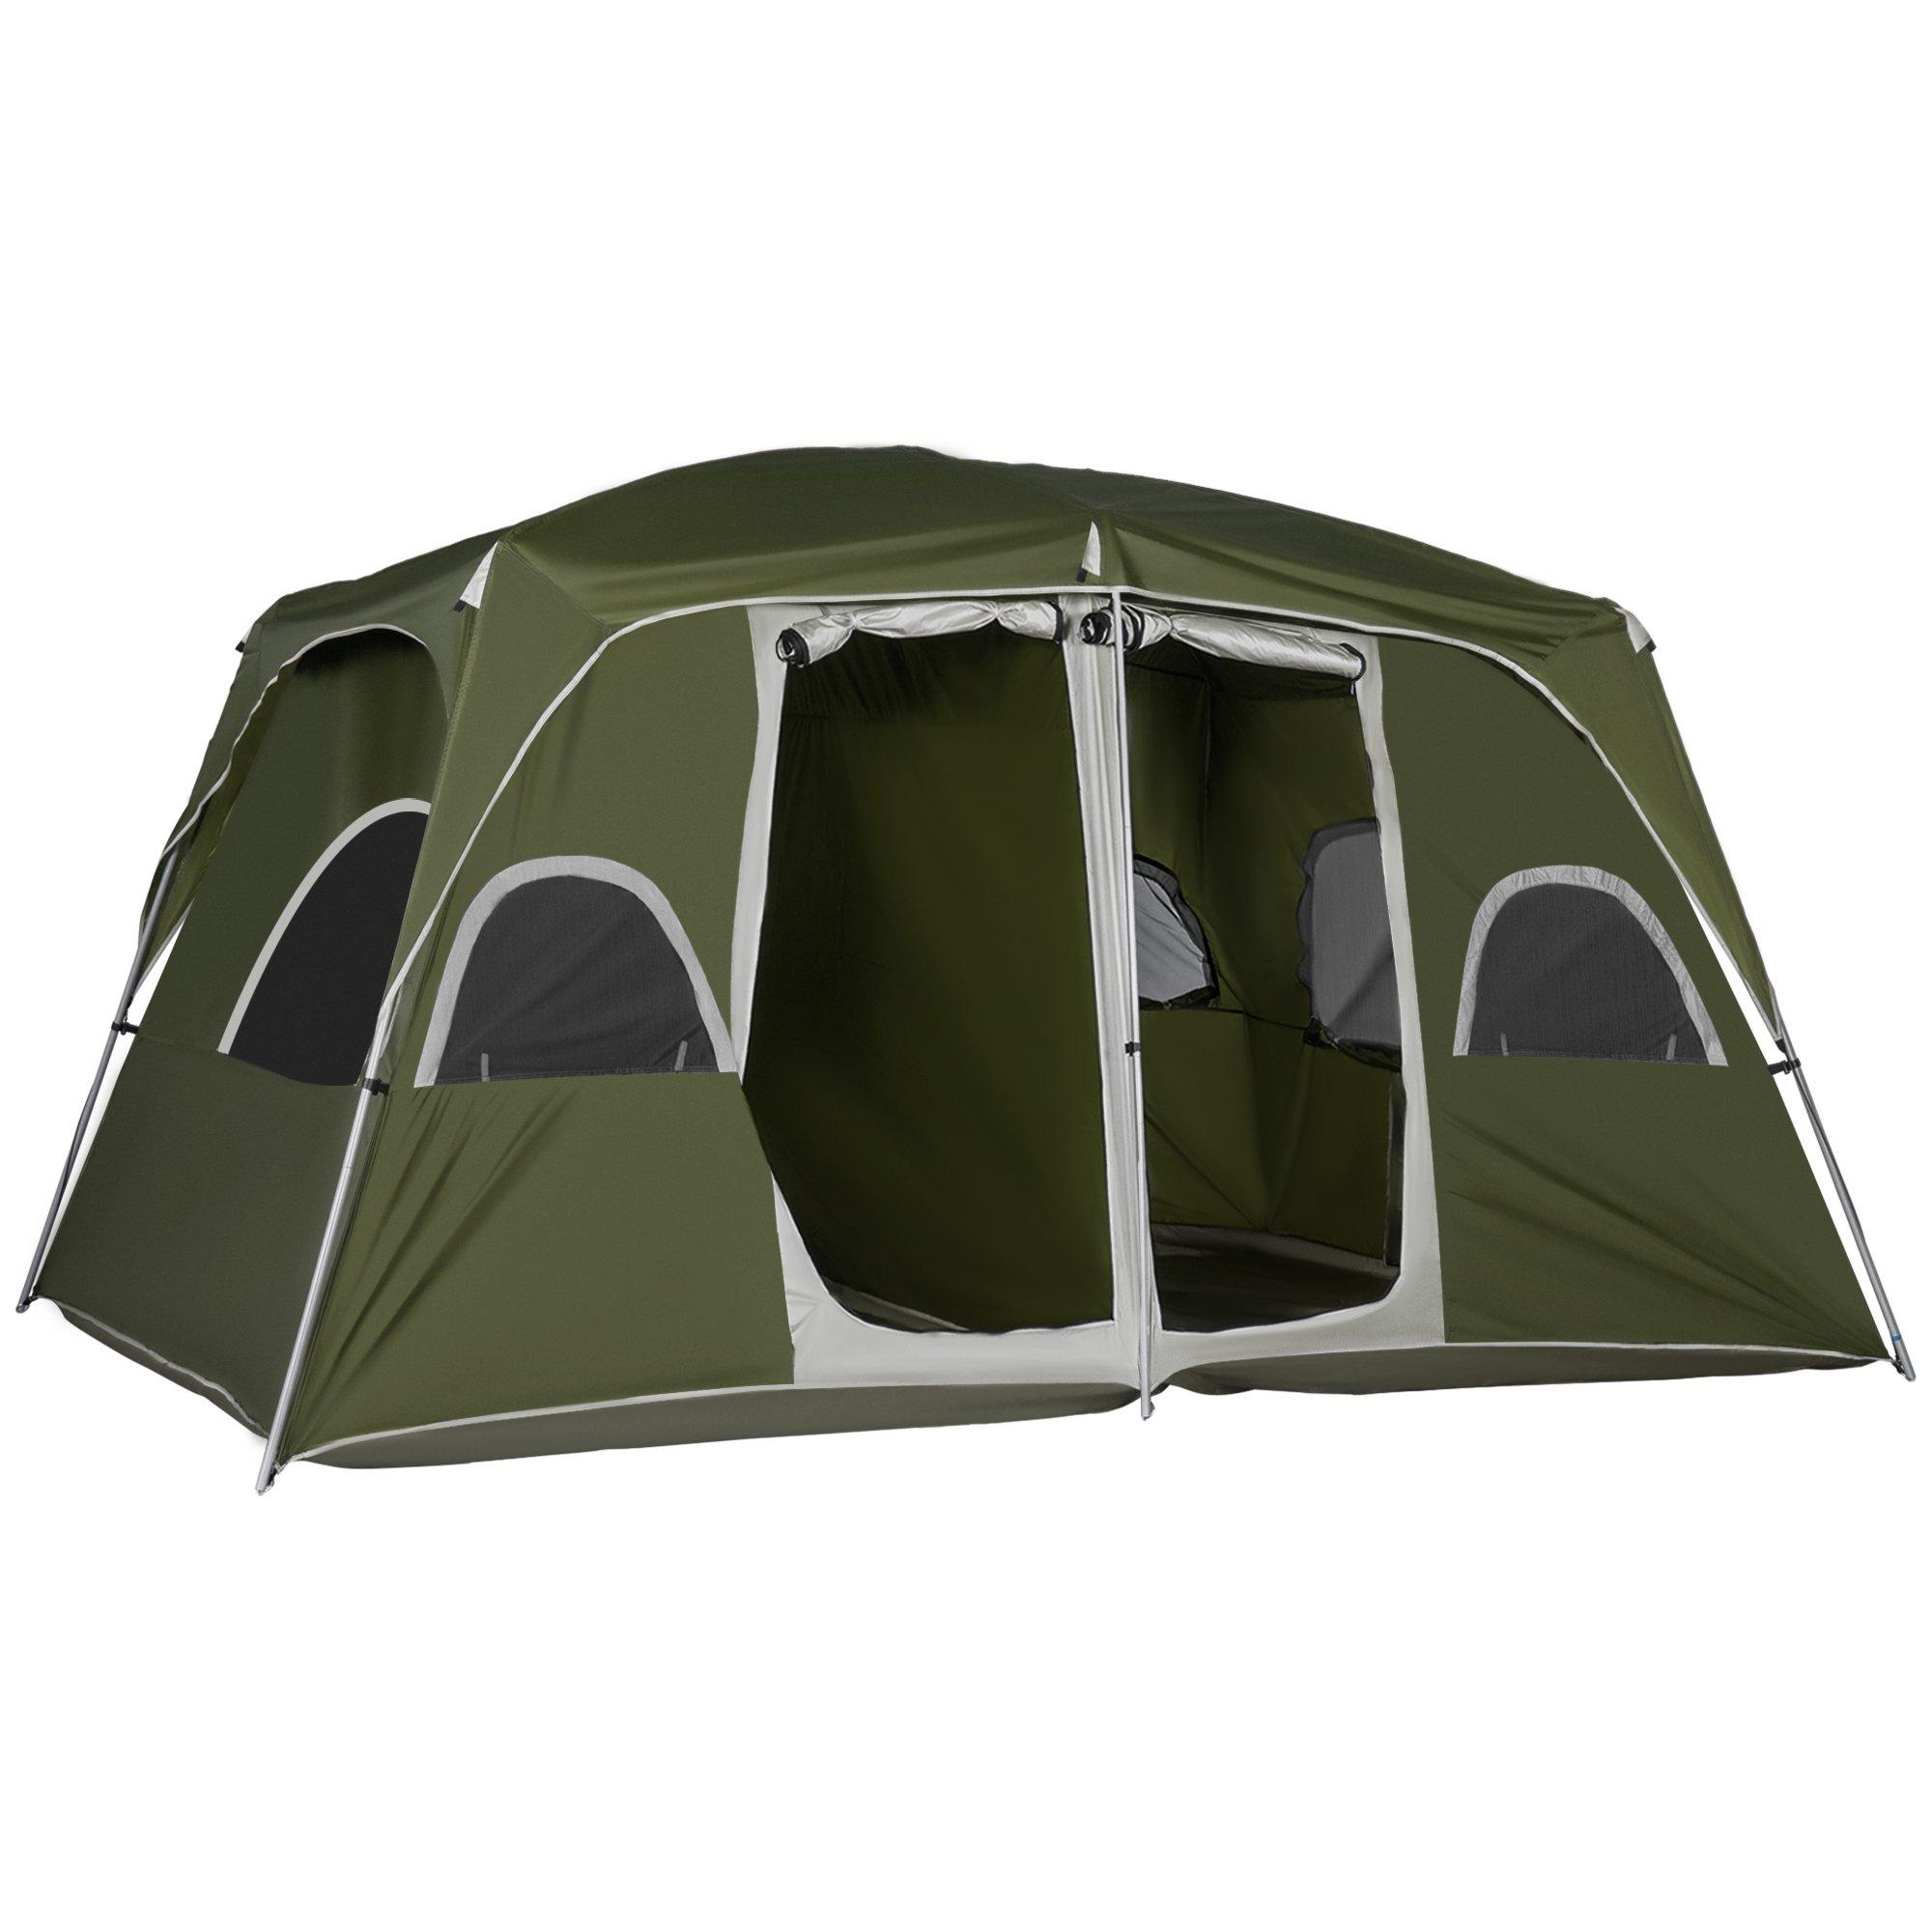 Camping Tent, Family Tent 4-8 Person 2 Room Easy Set Up, Green